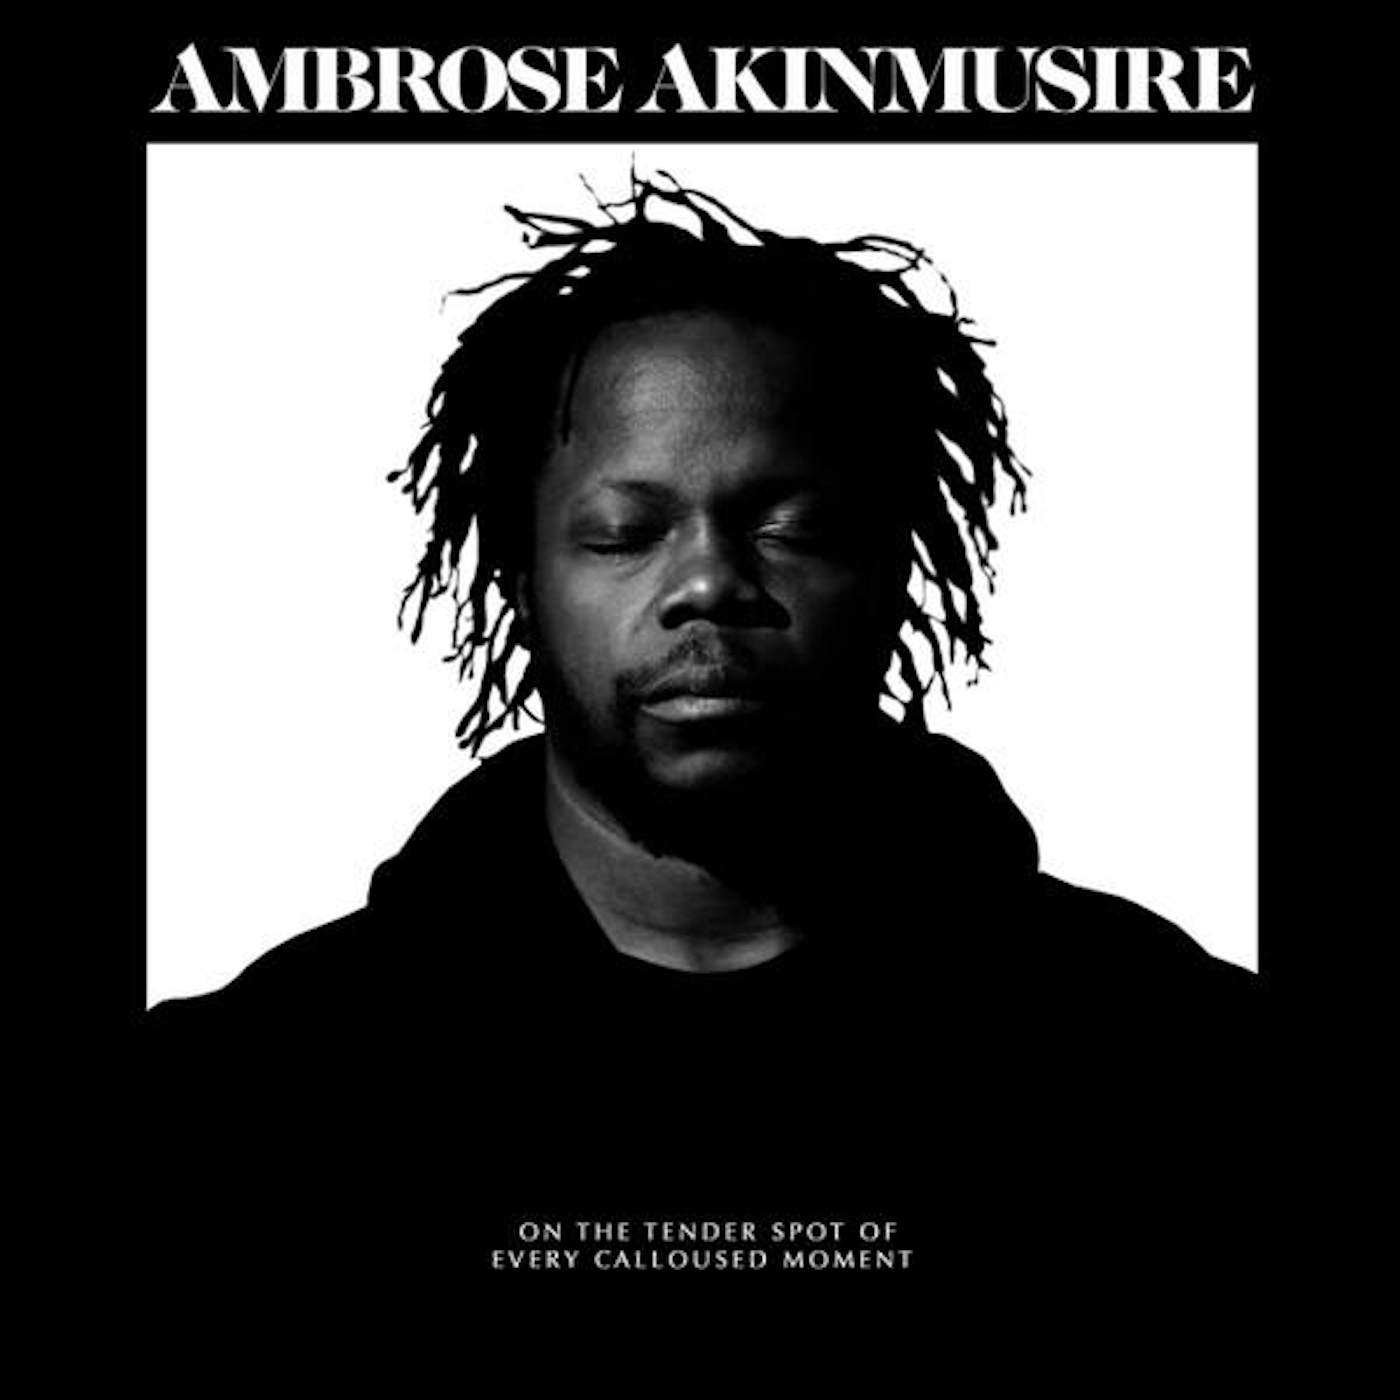 Ambrose Akinmusire ON THE TENDER SPOT OF EVERY CALLOUSED MOMENT CD